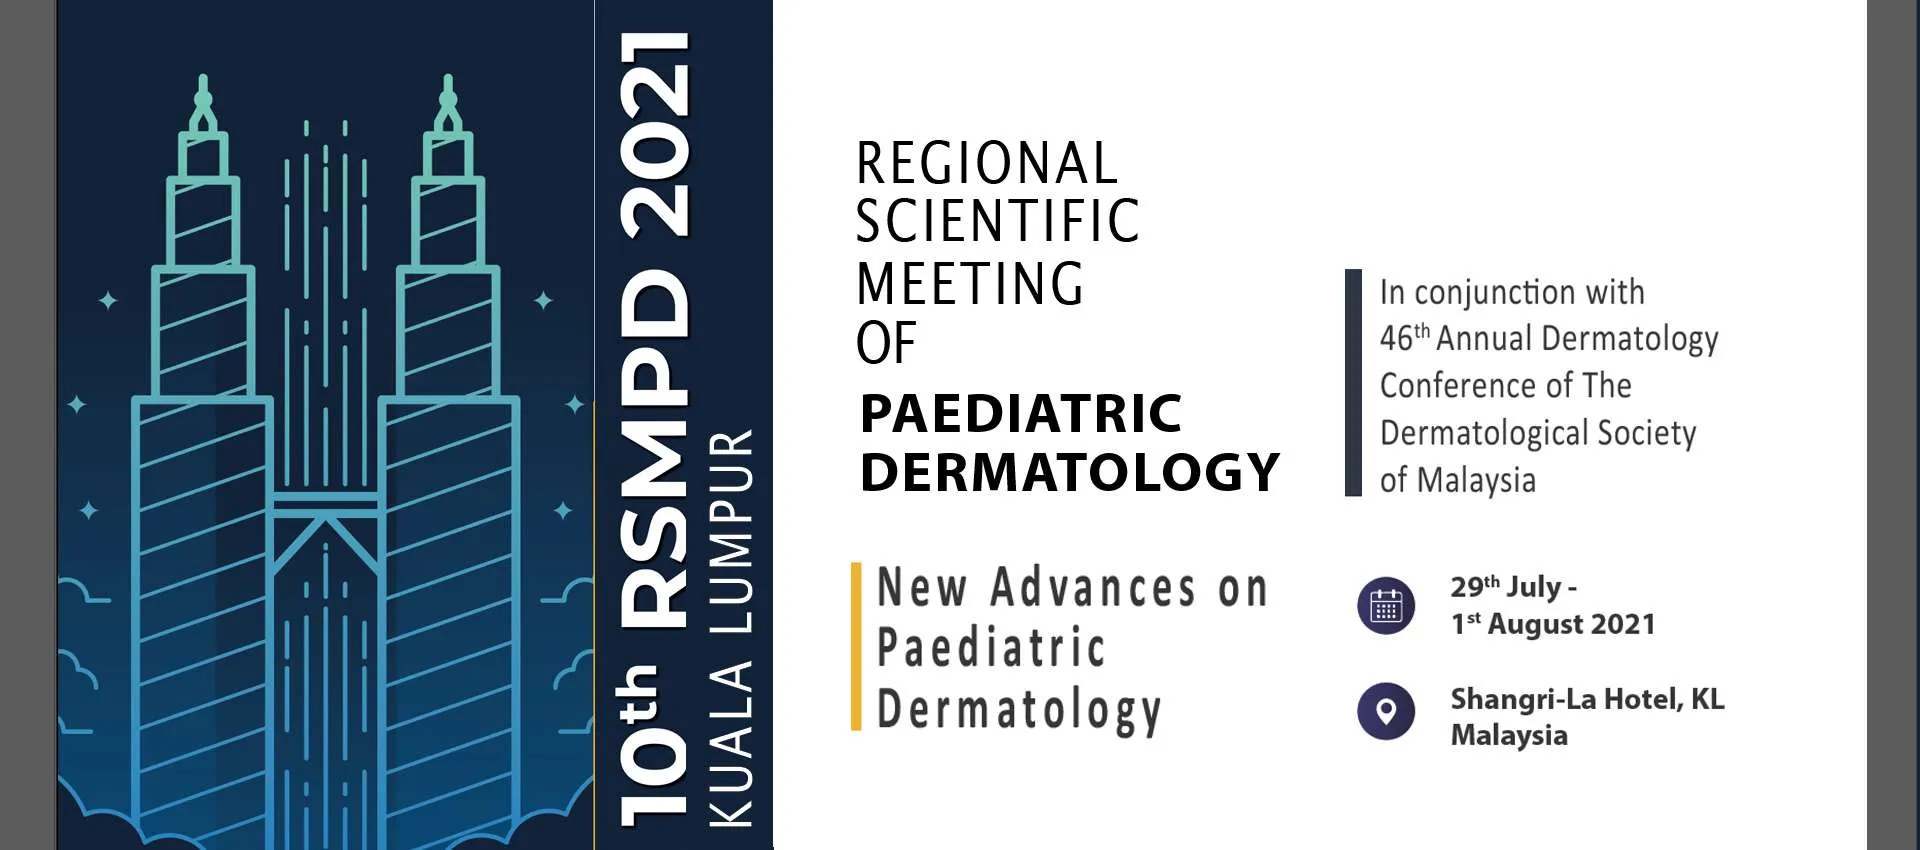 10th Regional Scientific Meeting Of Paediatric Dermatology And 46th Malaysian Annual Dermatological Conference 2021